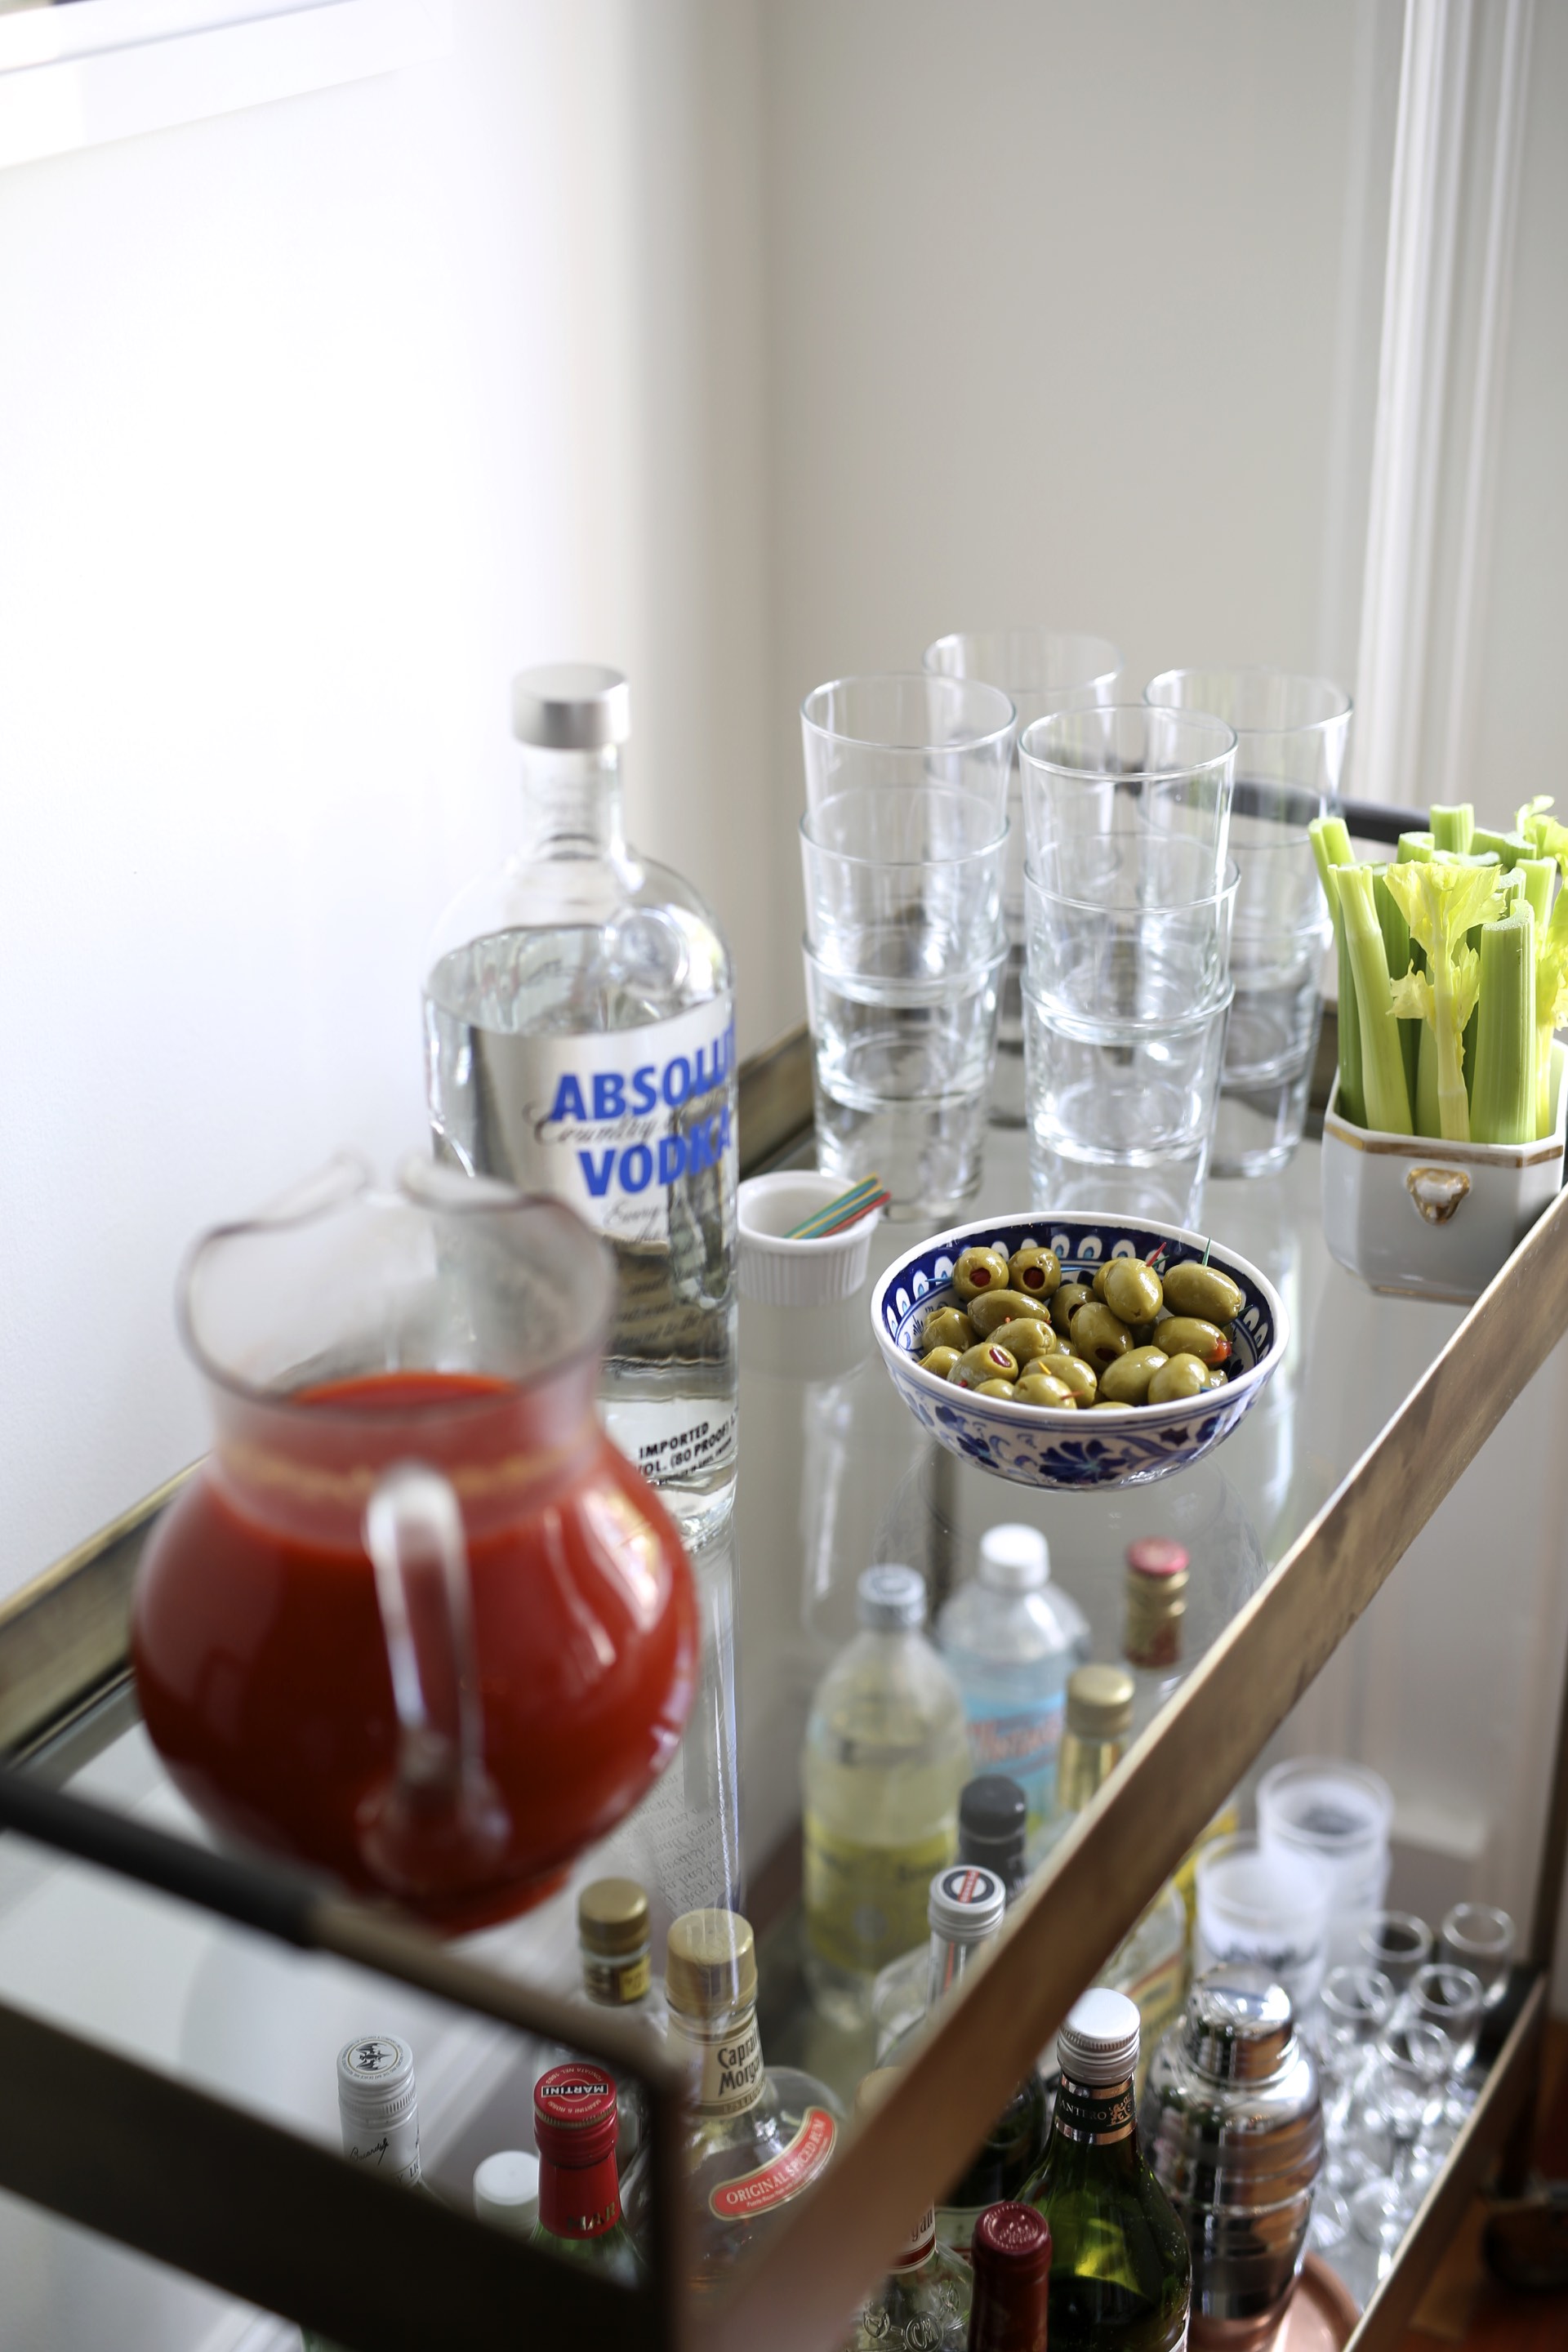 Bloody Mary Station